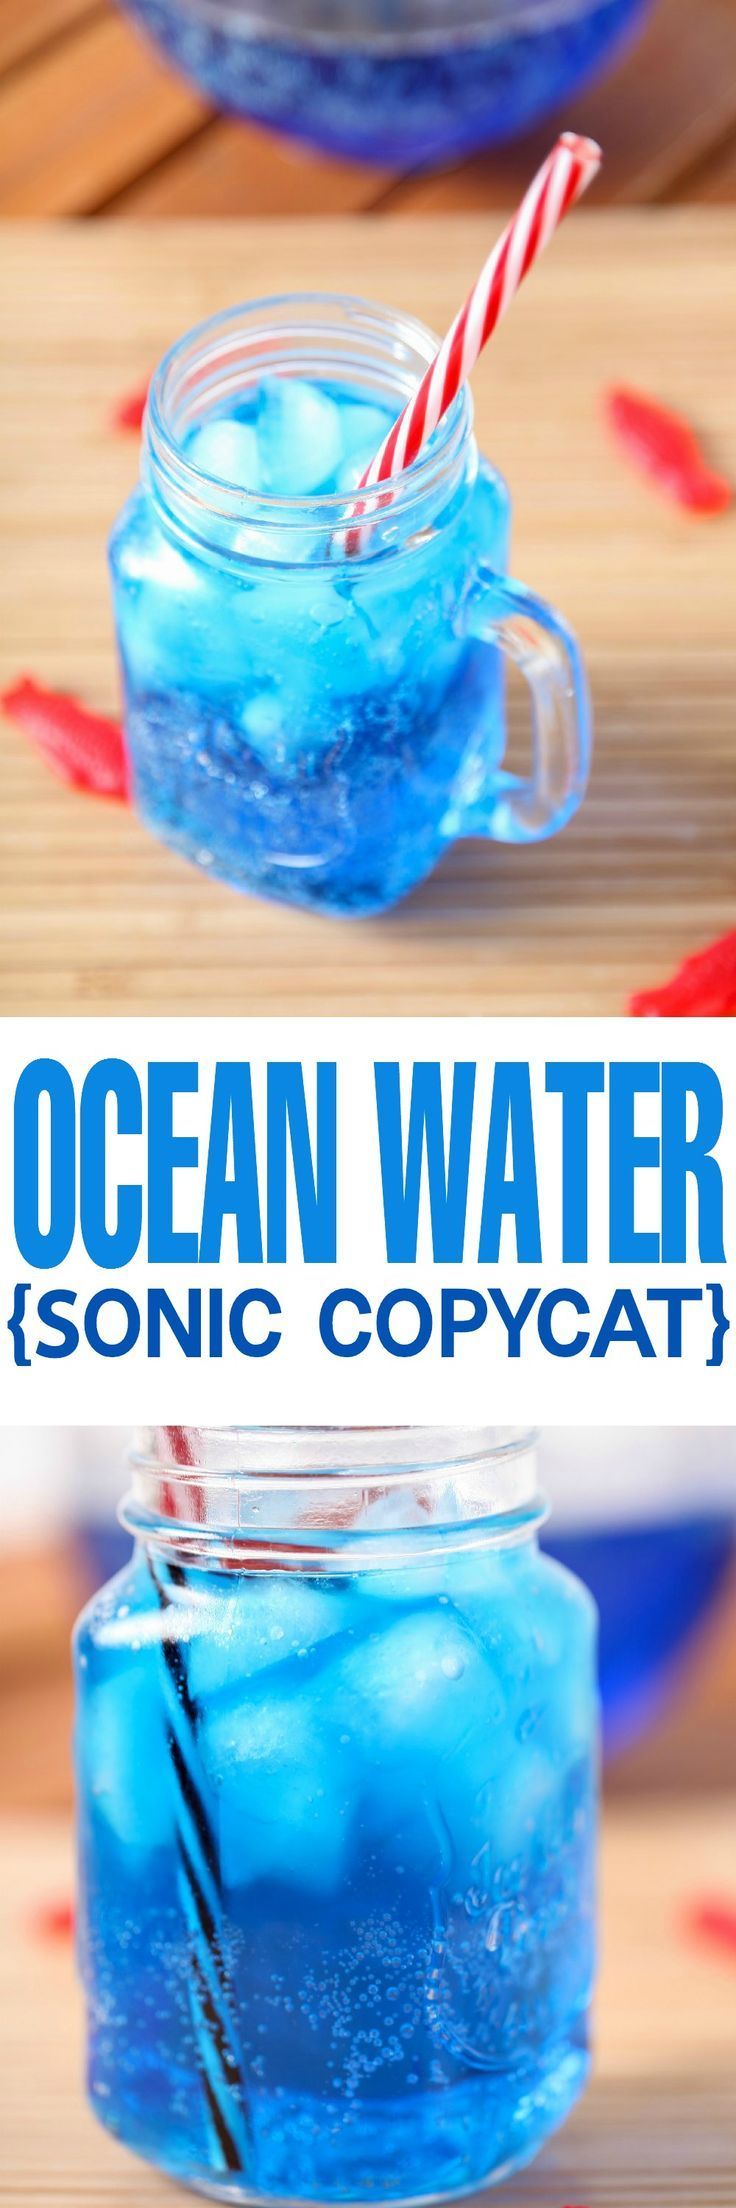 Copycat Sonic Ocean Water Recipe: The most gorgeous and refreshing summer drink around. The perfect non alcoholic drink for